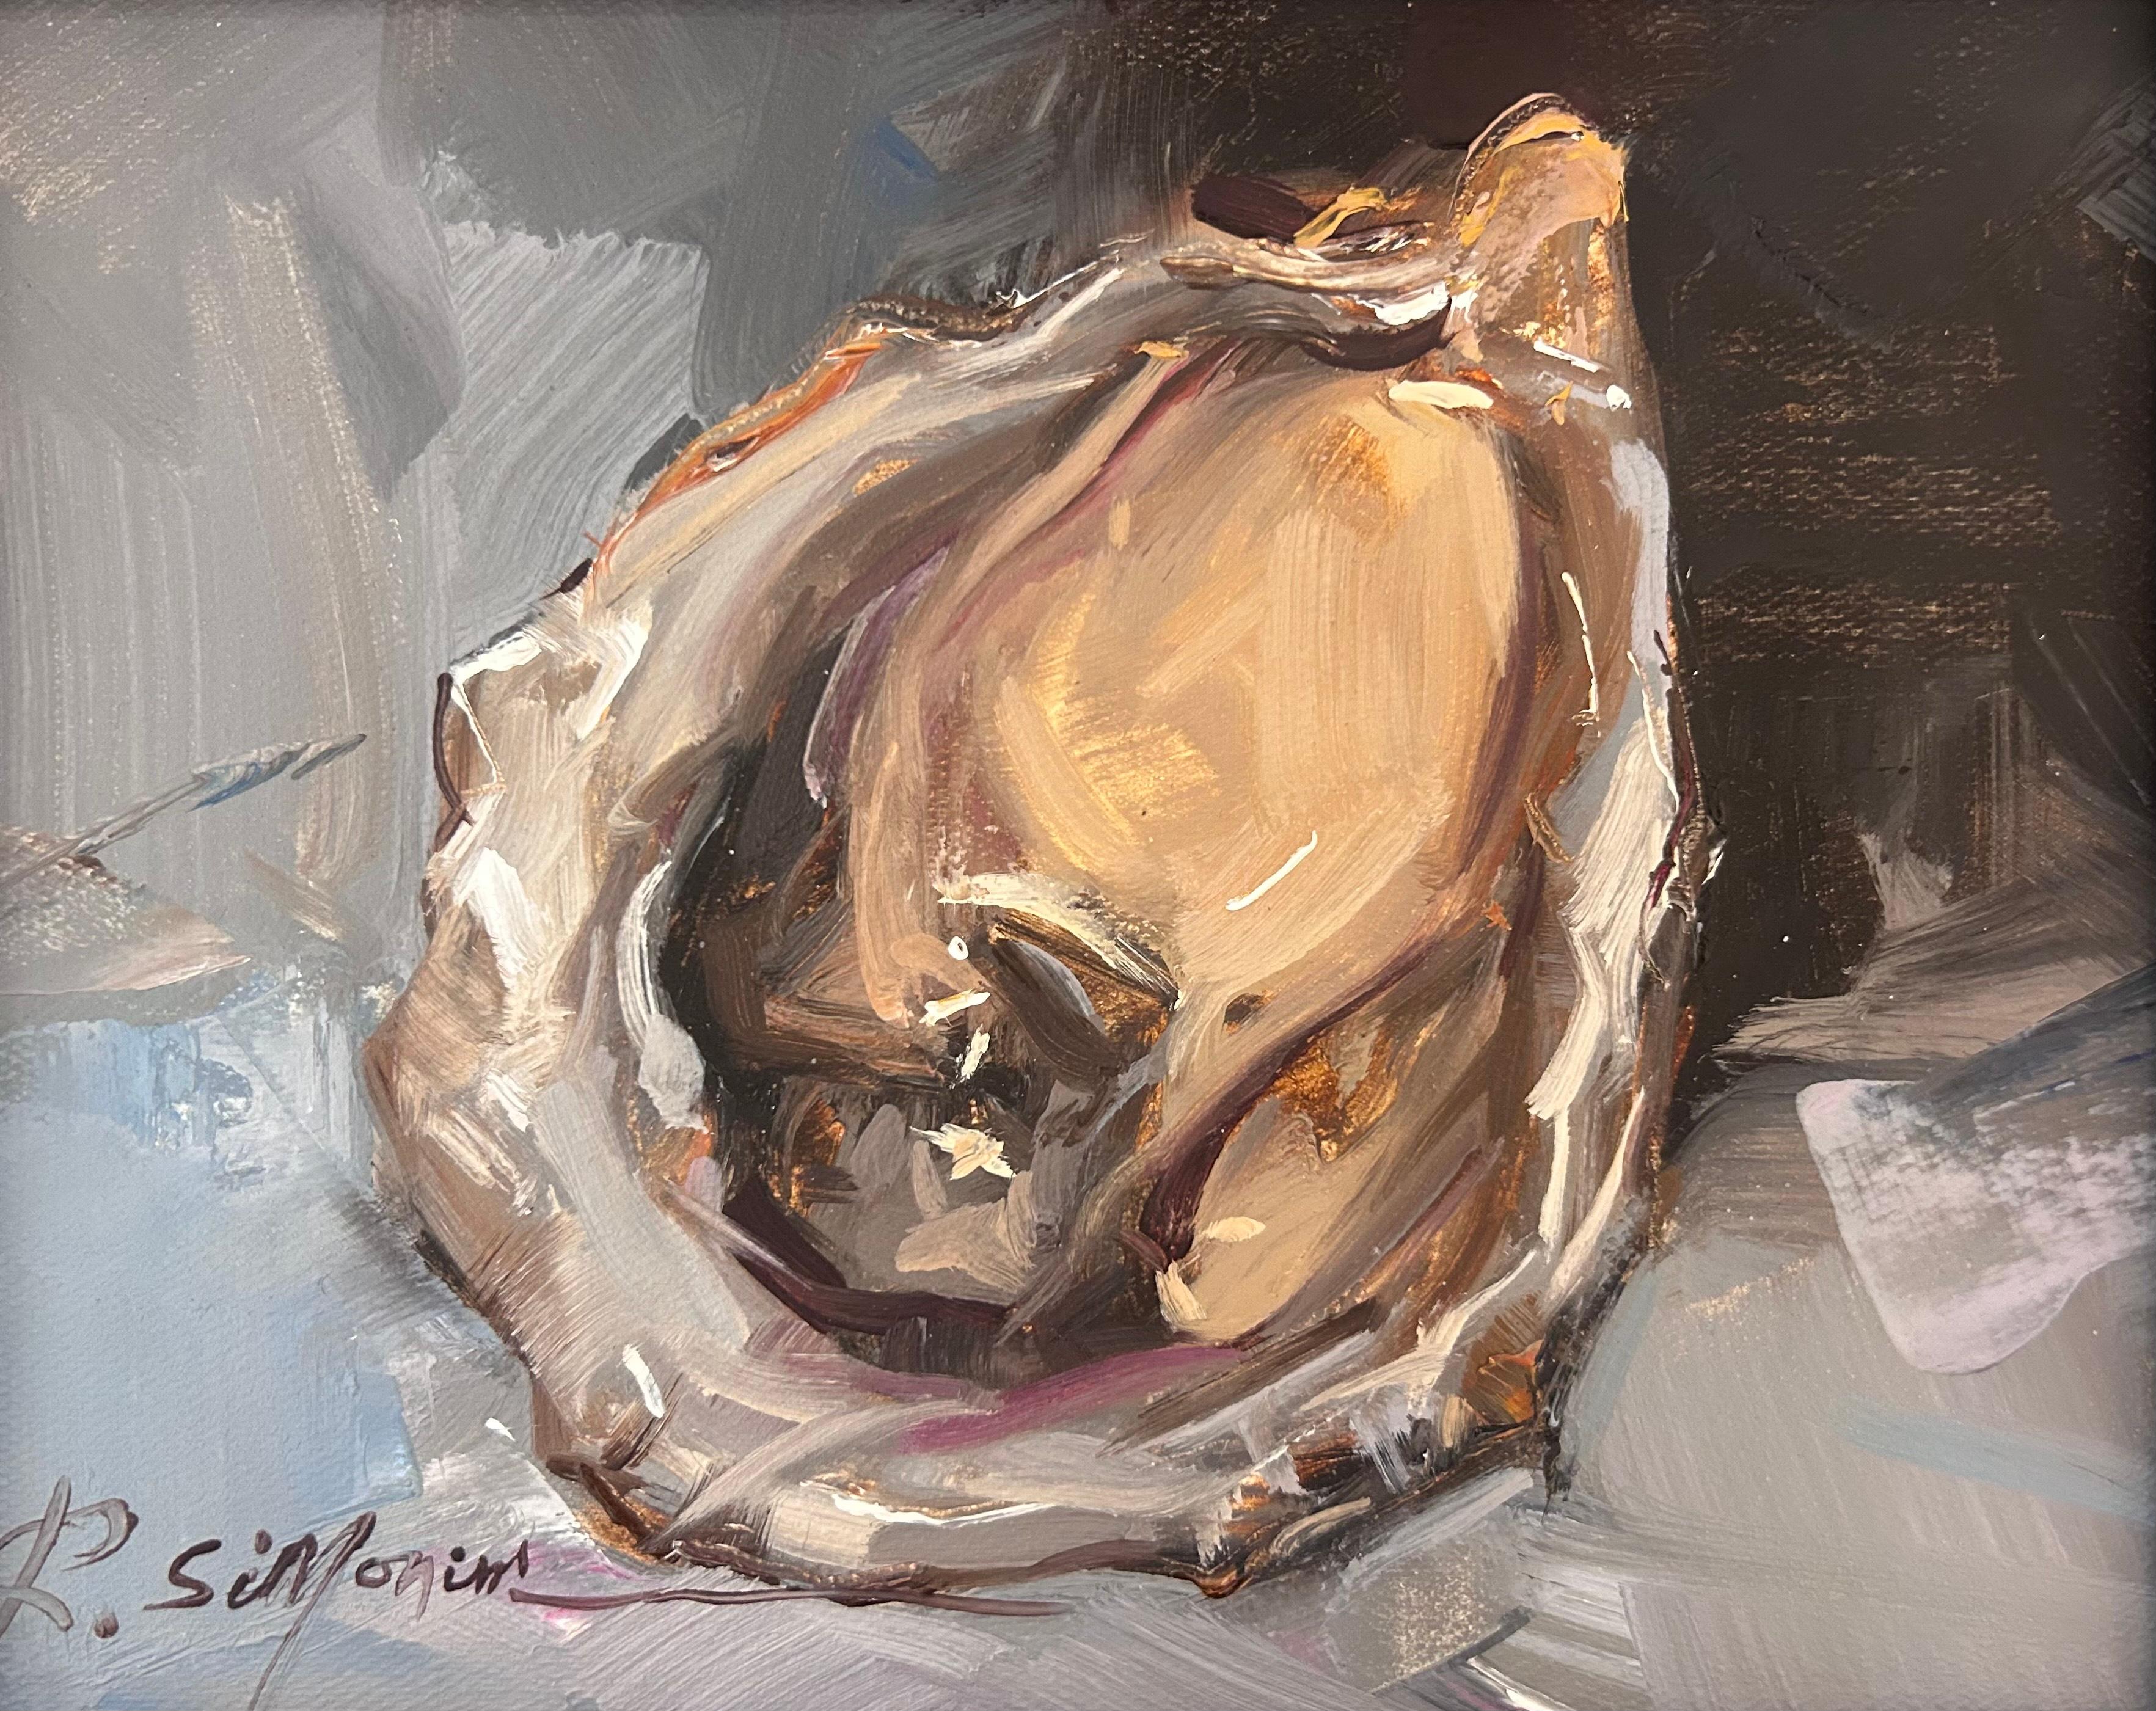 Ray Simonini "Shucked" 8x10 Oyster Shell Impressionist Oil Painting on Canvas